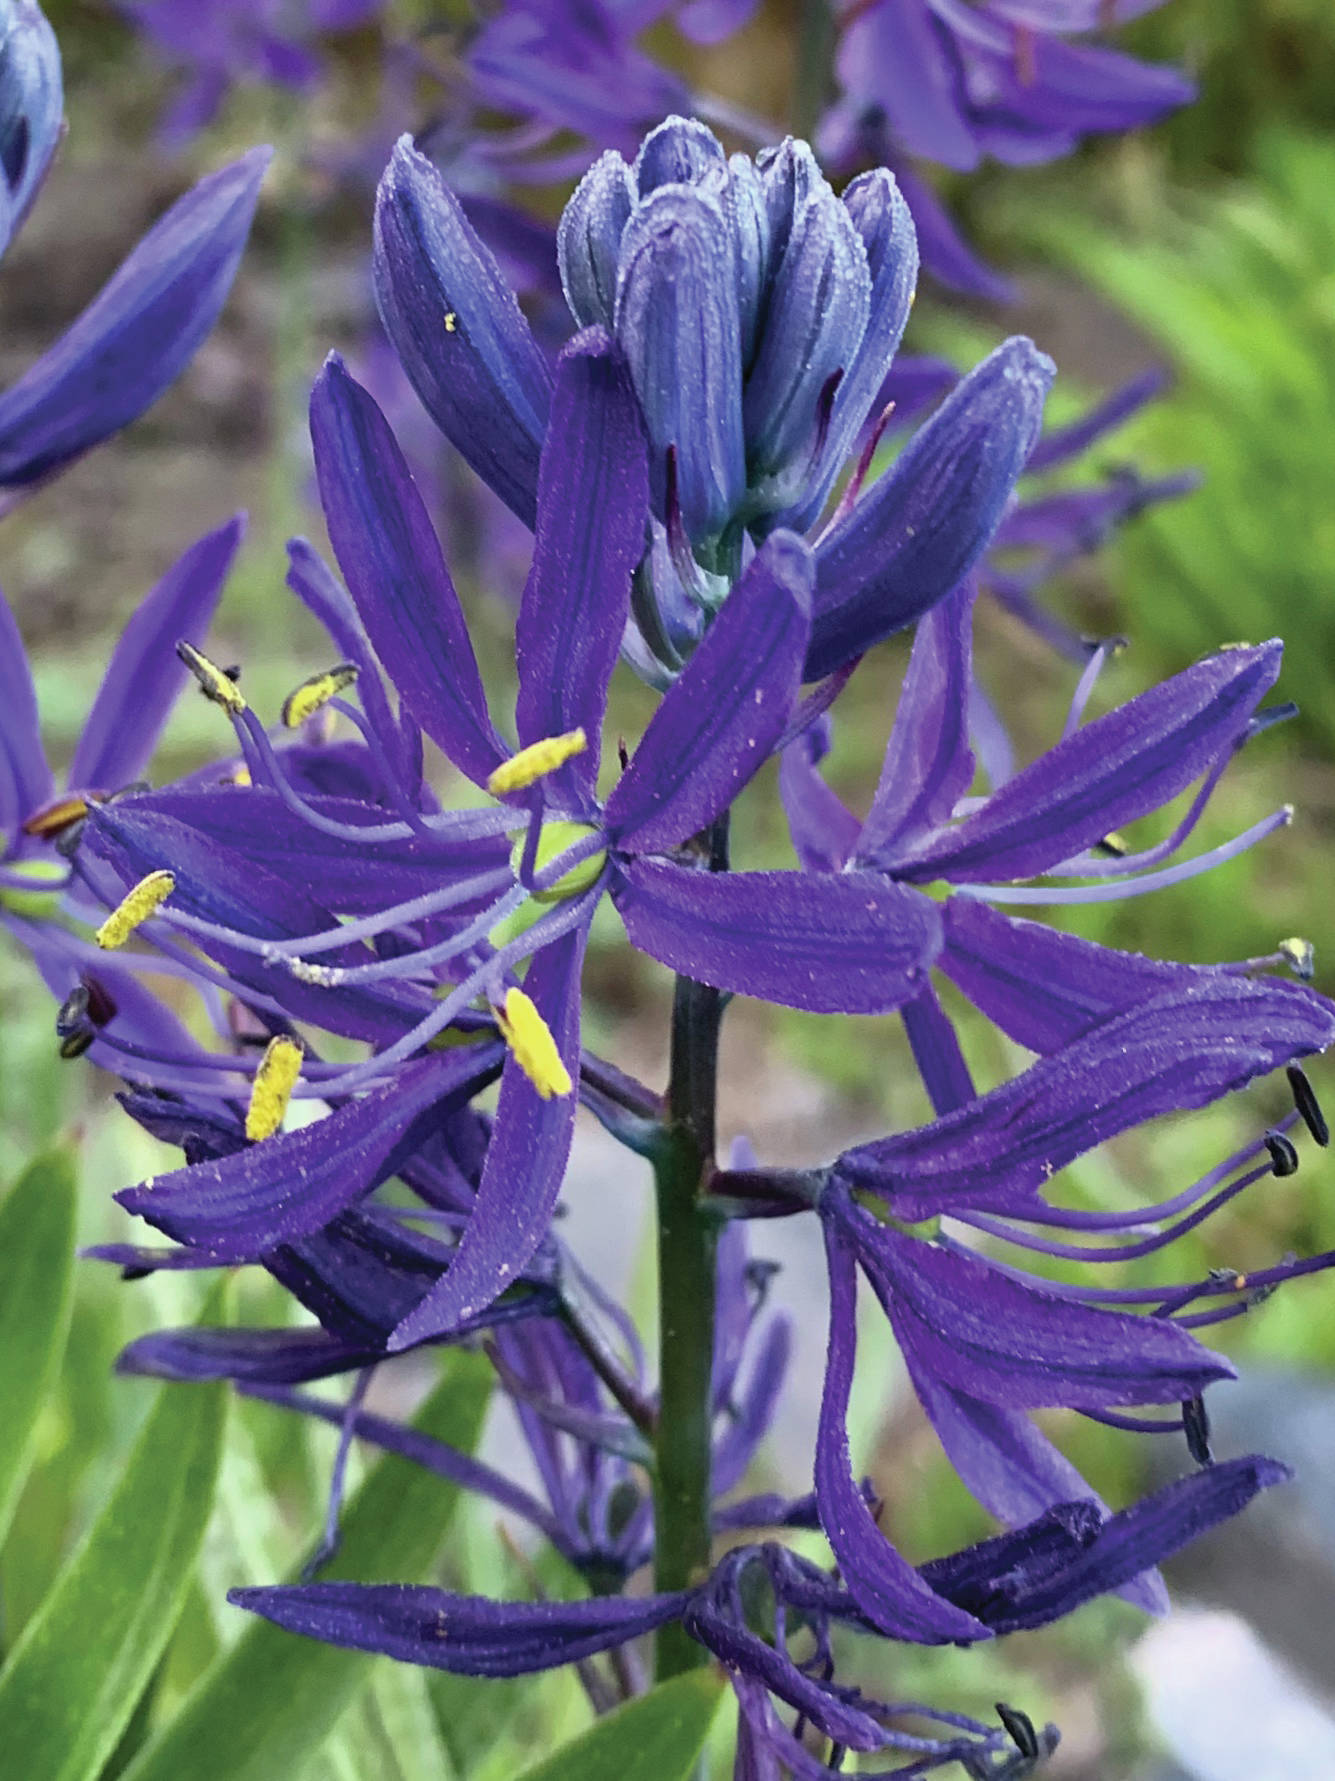 Camassia were in full bloom on Monday, June 8, 2020, in Rosemary Fitzpatrick’s Homer, Alaska, garden — “deeply appreciated by the neighborhood honey bees,” she says. (Photo by Rosemary Fitzpatrick)